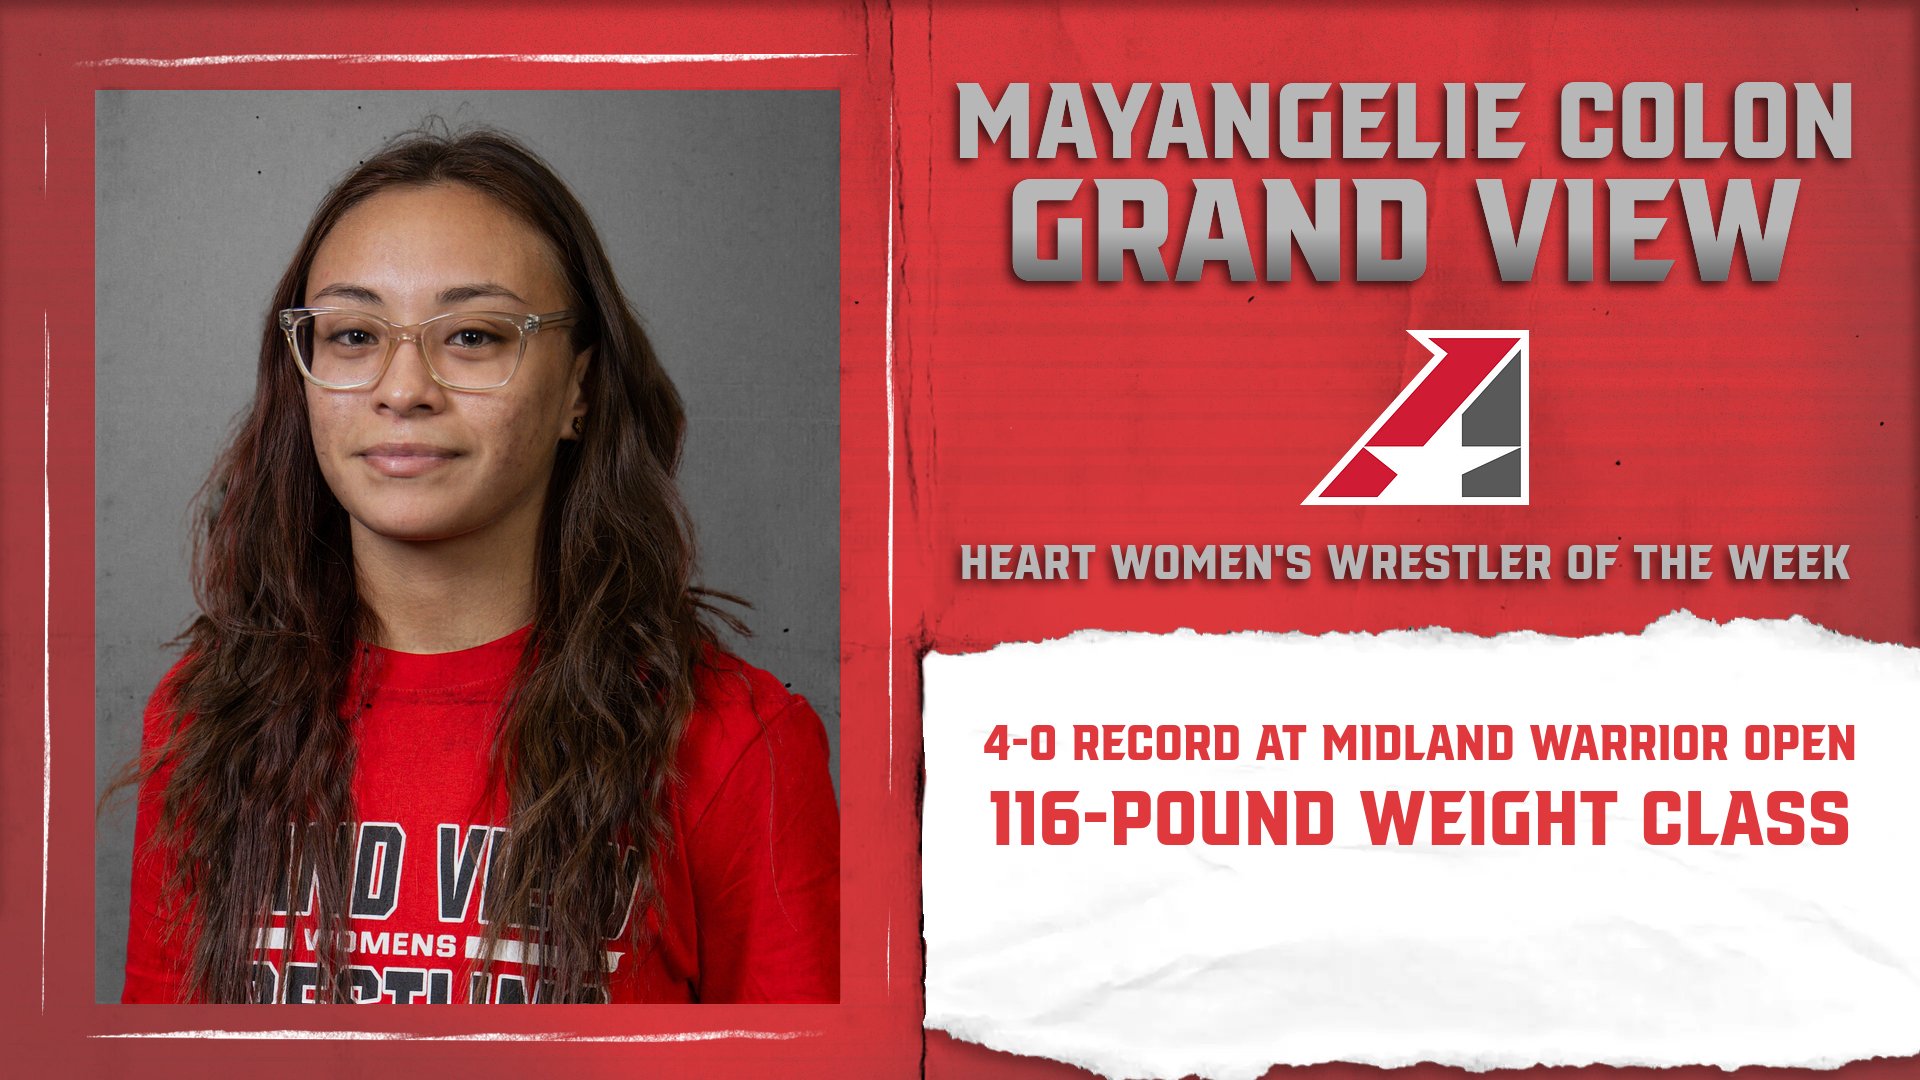 Mayanagelie Colon of Grand View Earns Heart Women’s Wrestler of the Week